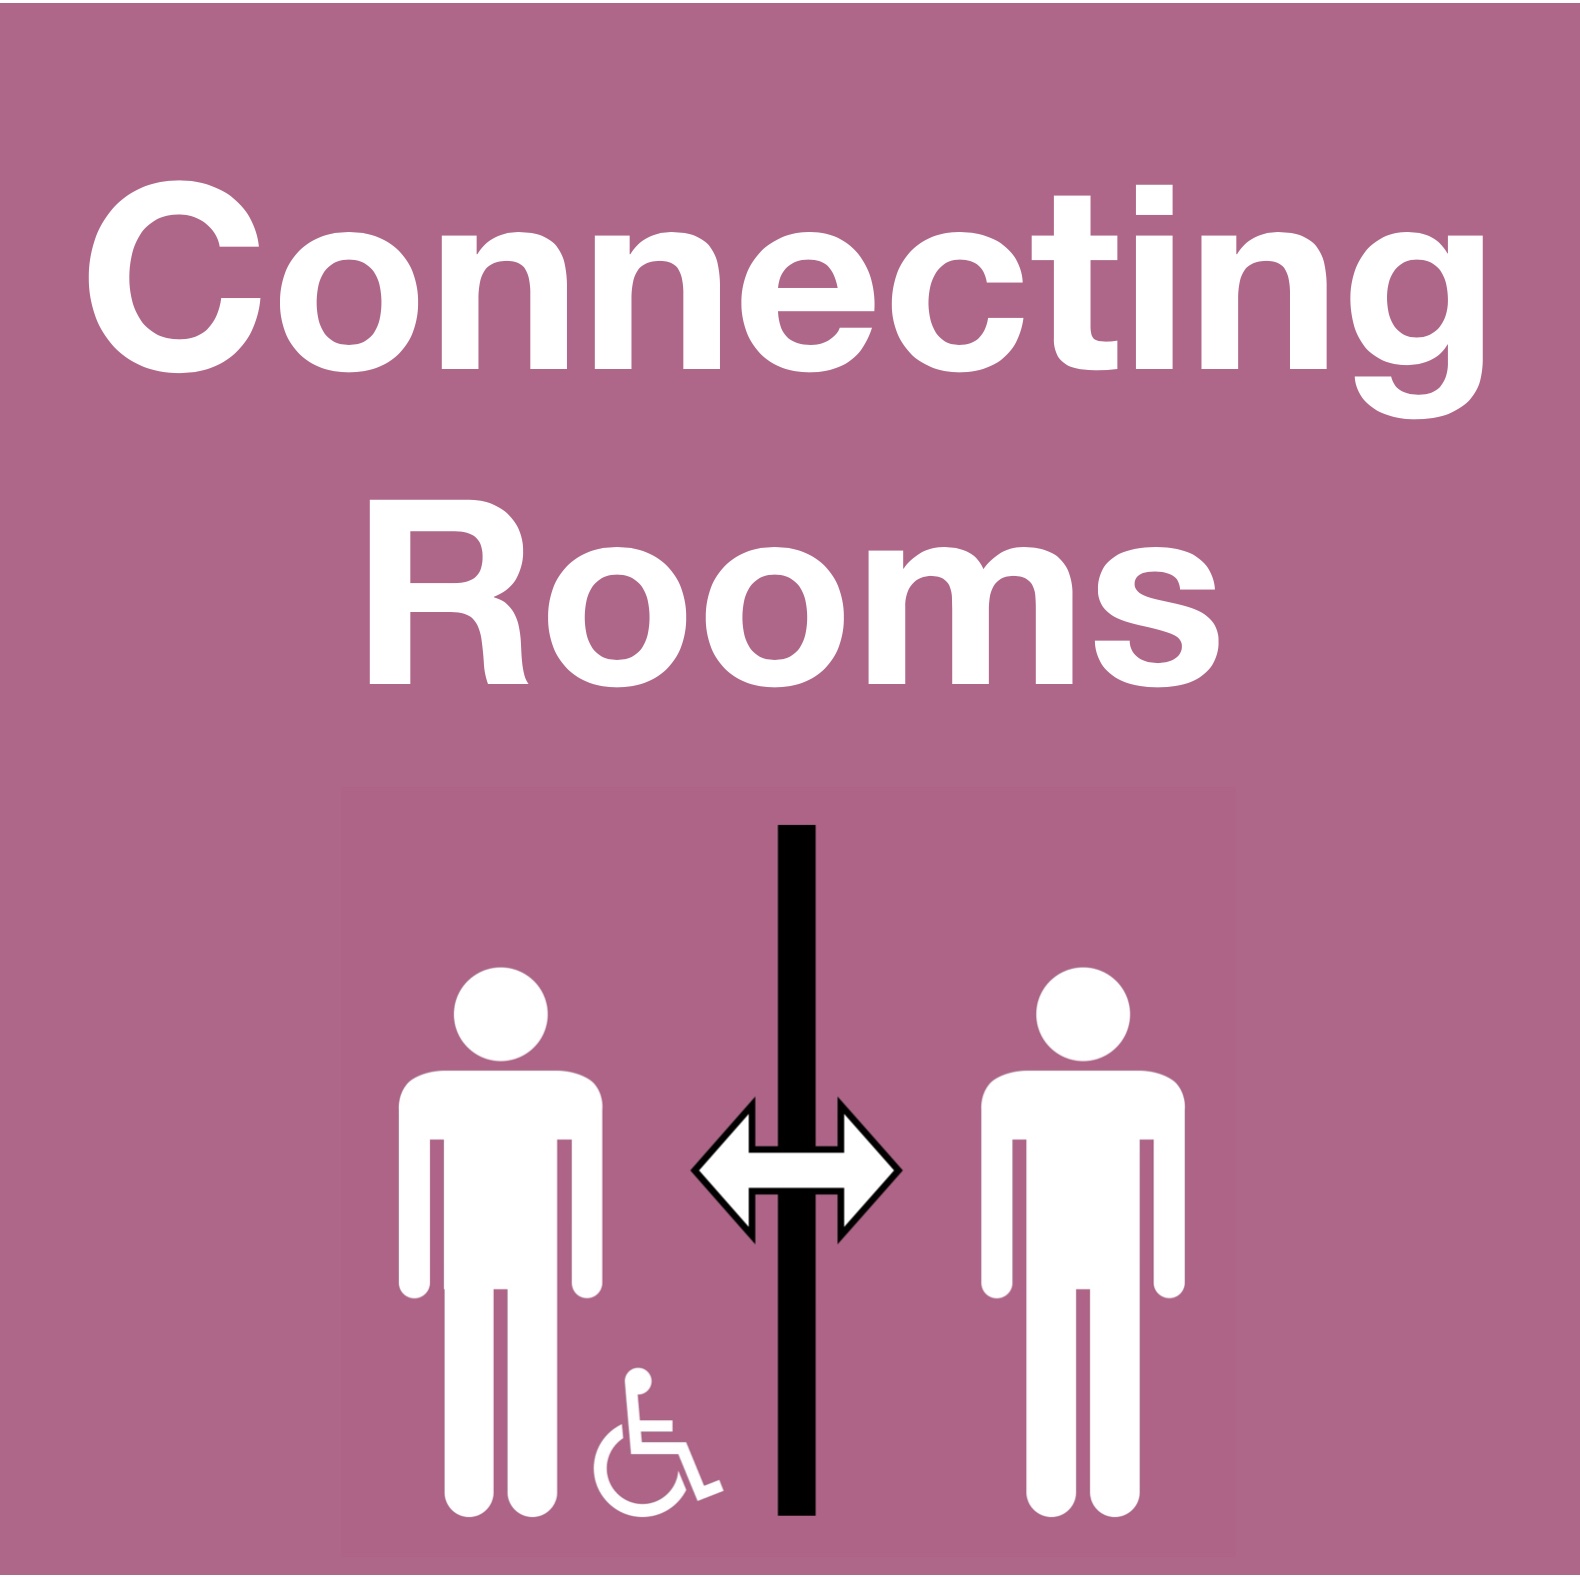 Interconnecting Rooms